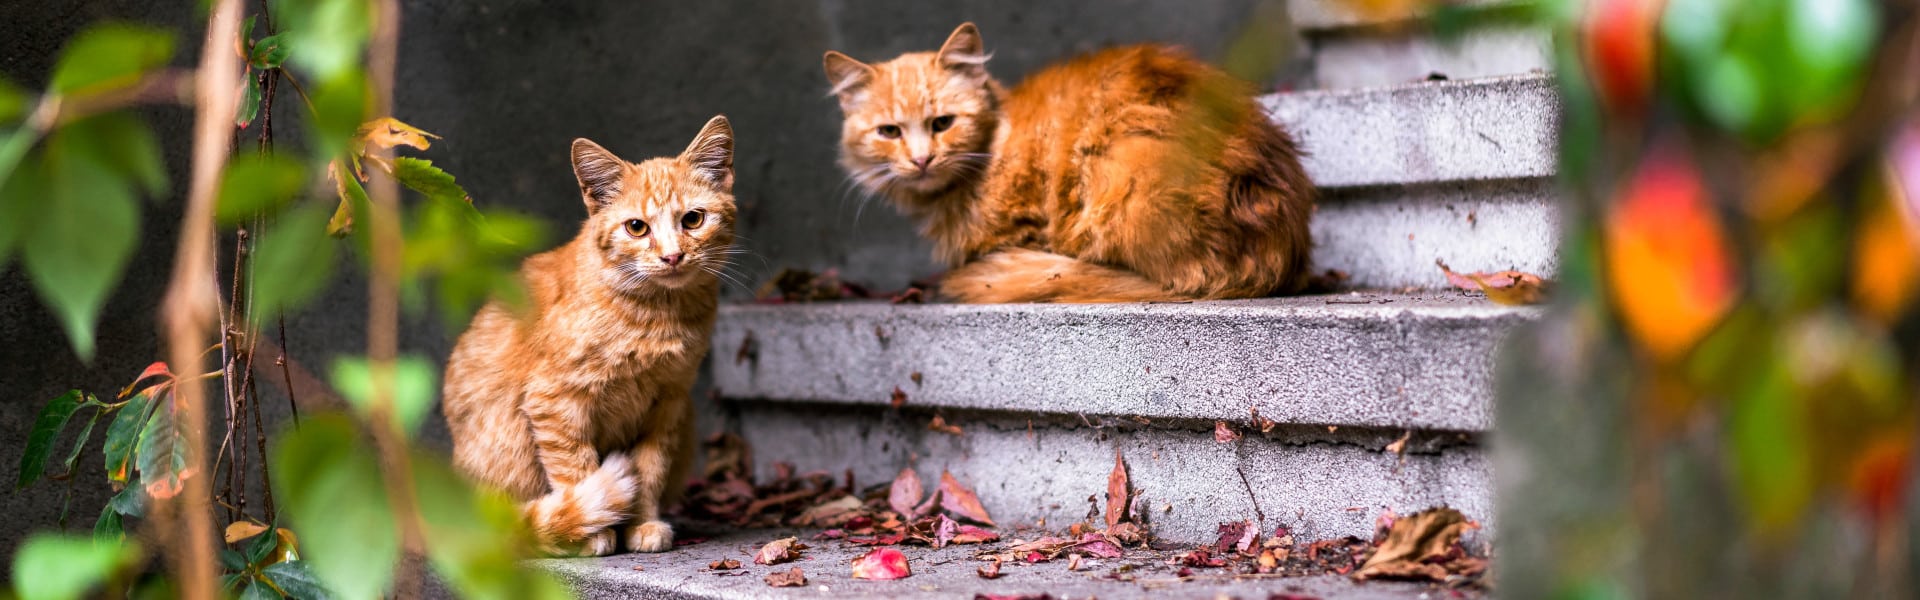 Caring for Community Cats